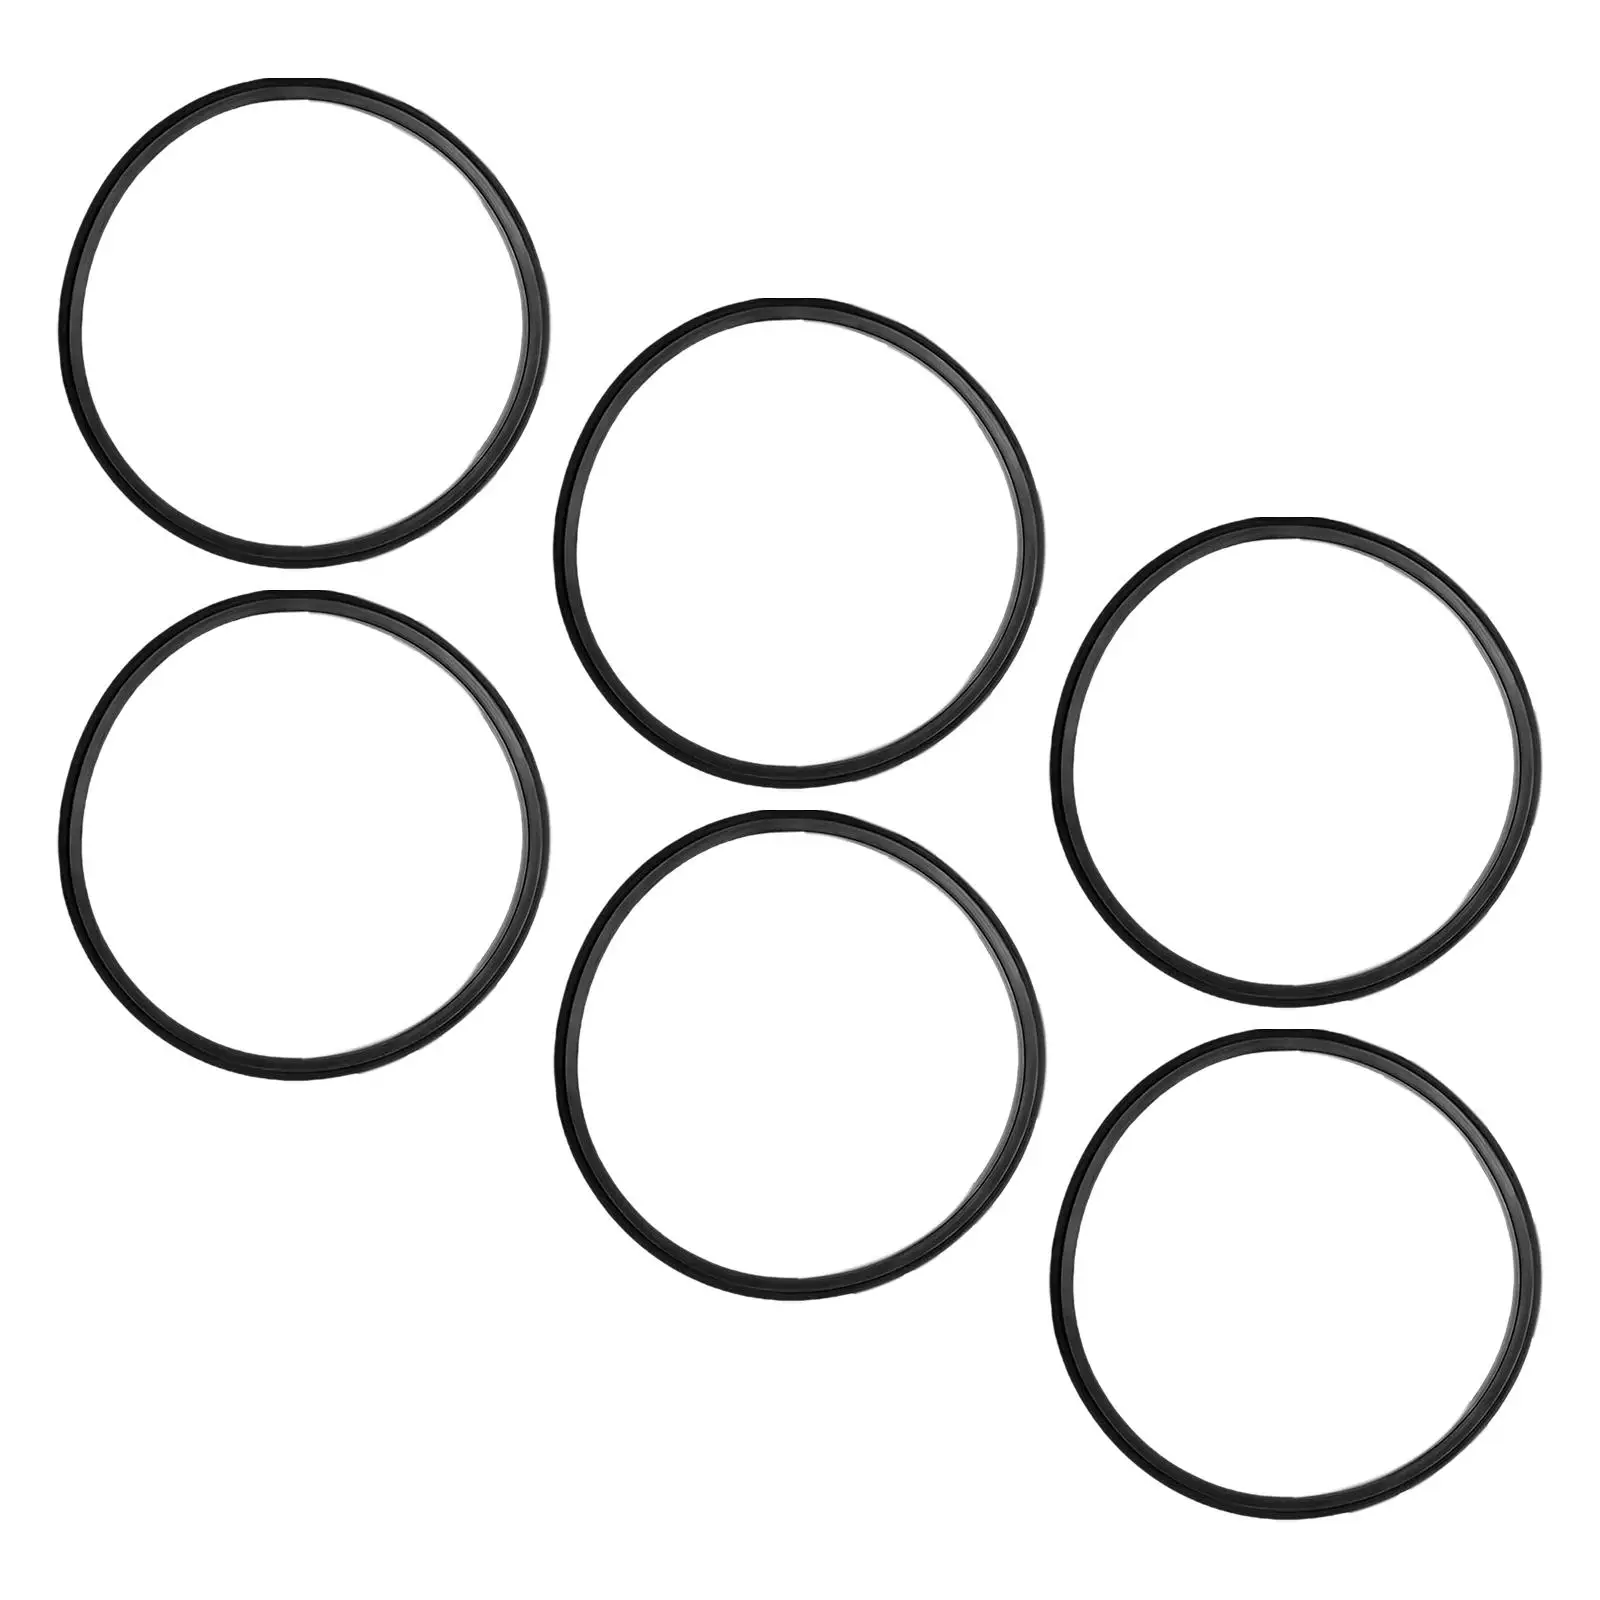 6x Silicone Jar Gasket Silicone Replacement Gasket Sket Replacement Silicone Sealing Ring for Glass Jars Food Containers